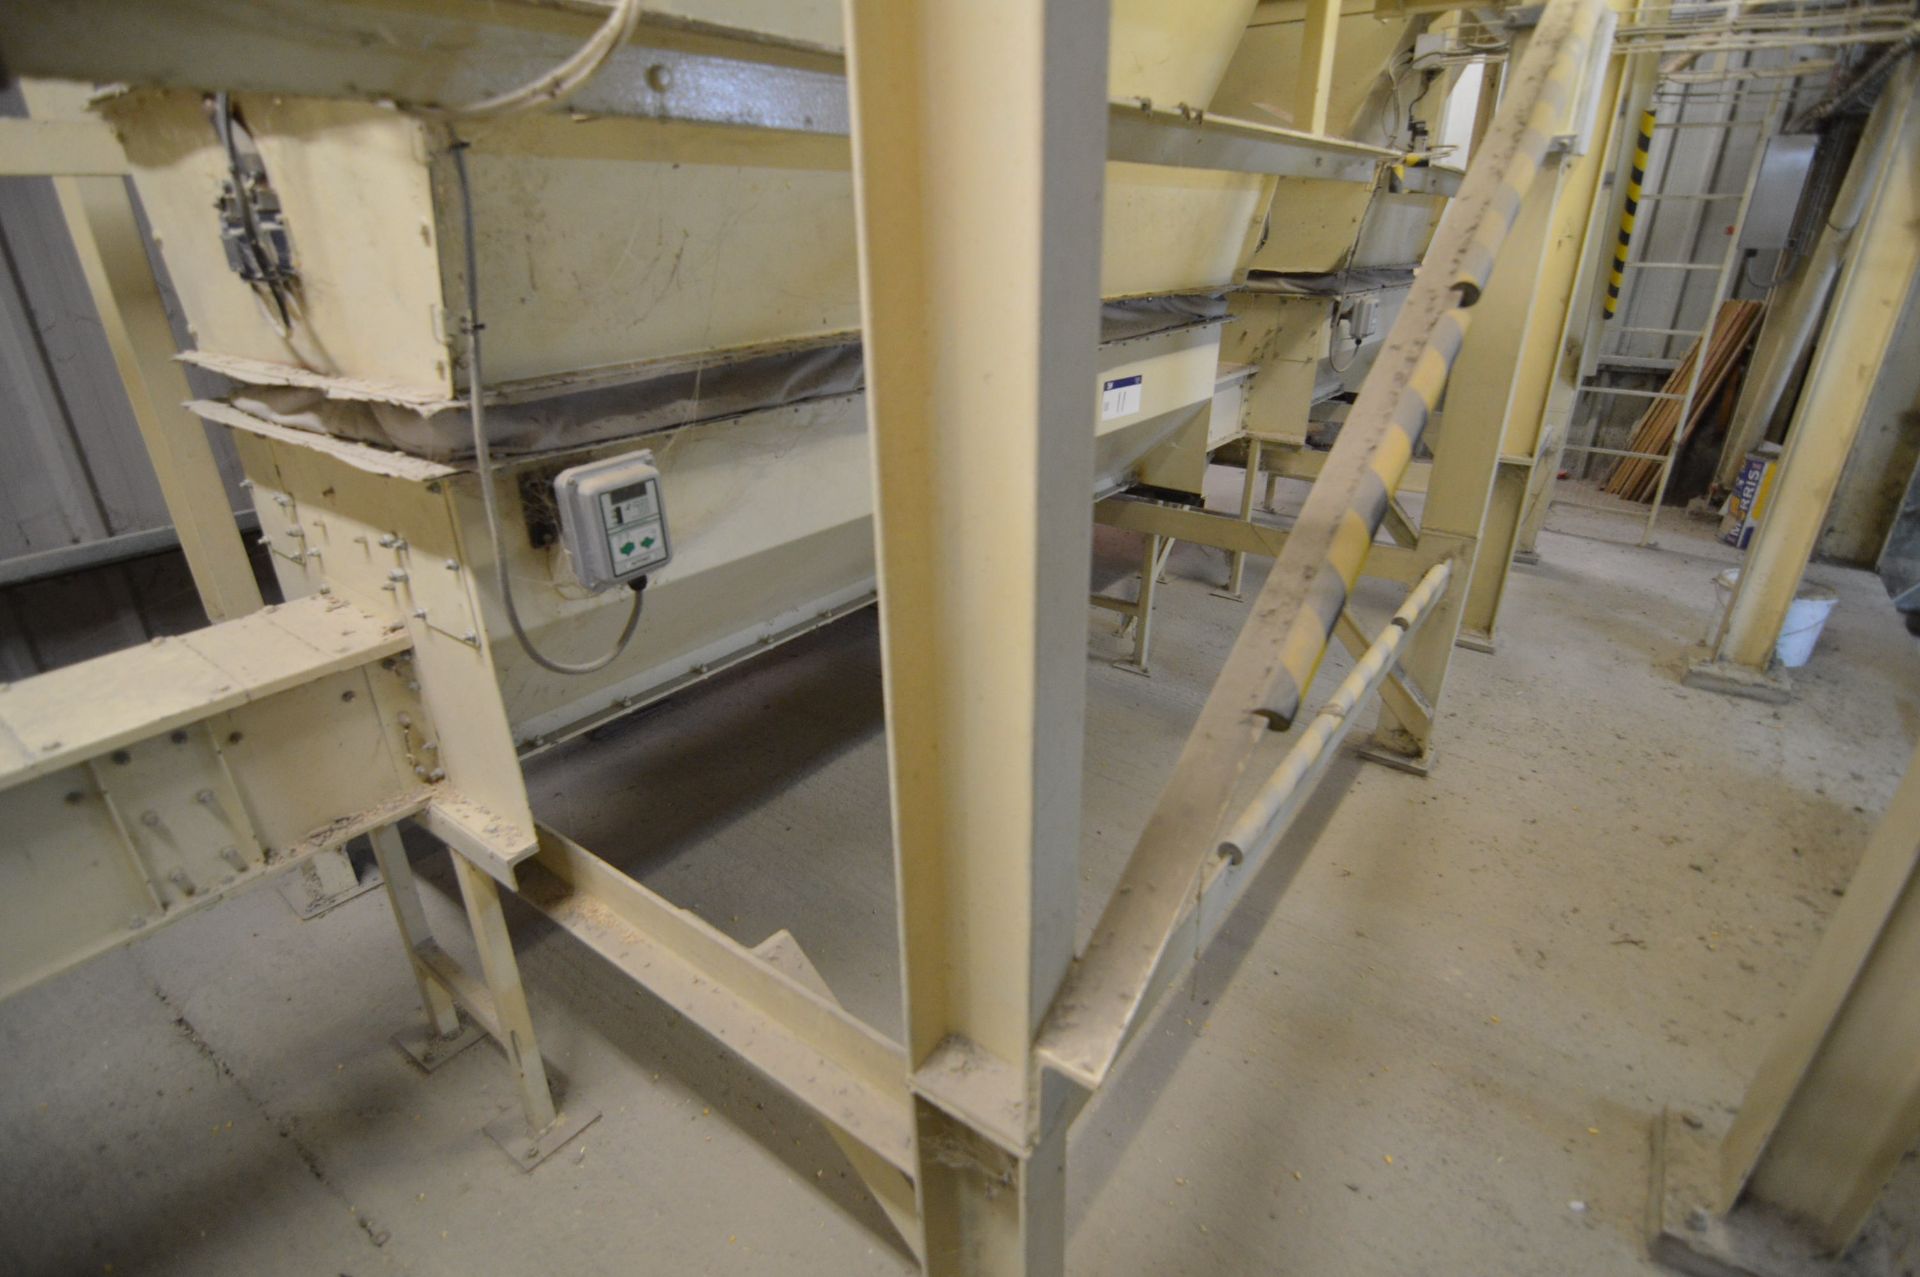 T A Shore 1000kg & 500kg LOADCELL HOPPER WEIGHERS, installed 2011, with loadcells, steel supports, - Bild 2 aus 3